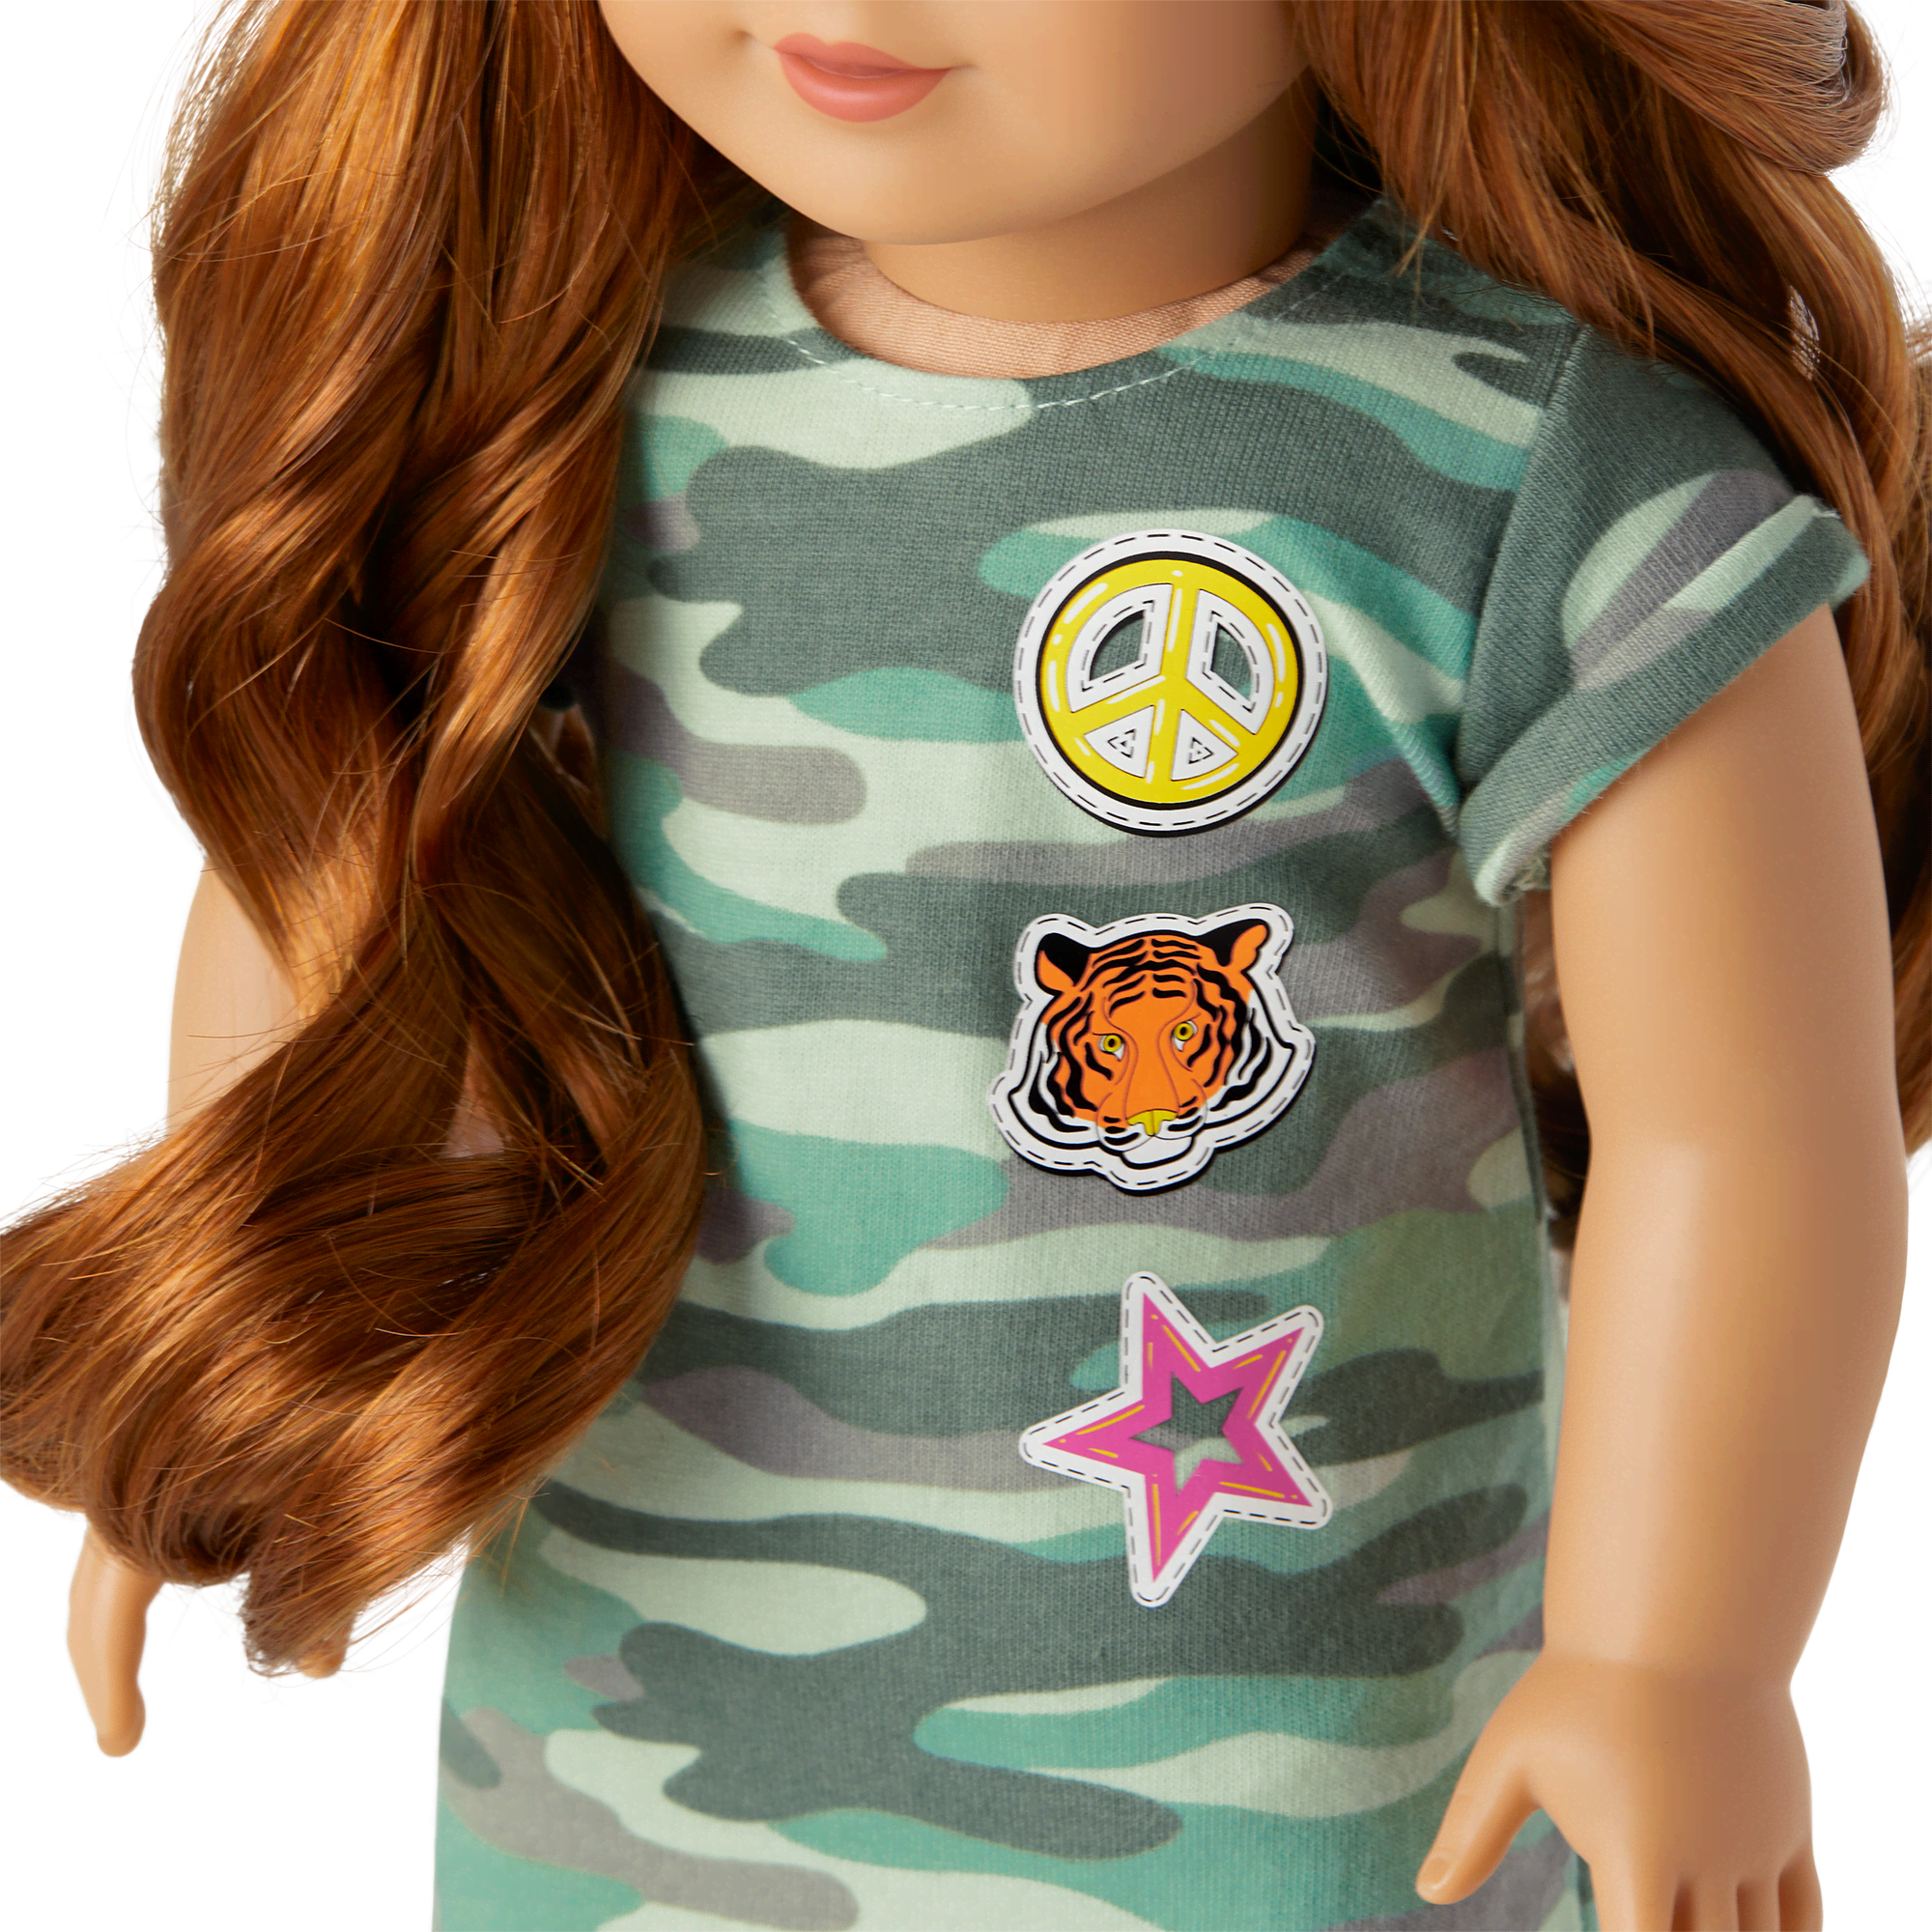 Show Your Strong Side Outfit & Accessories for 18-inch Dolls